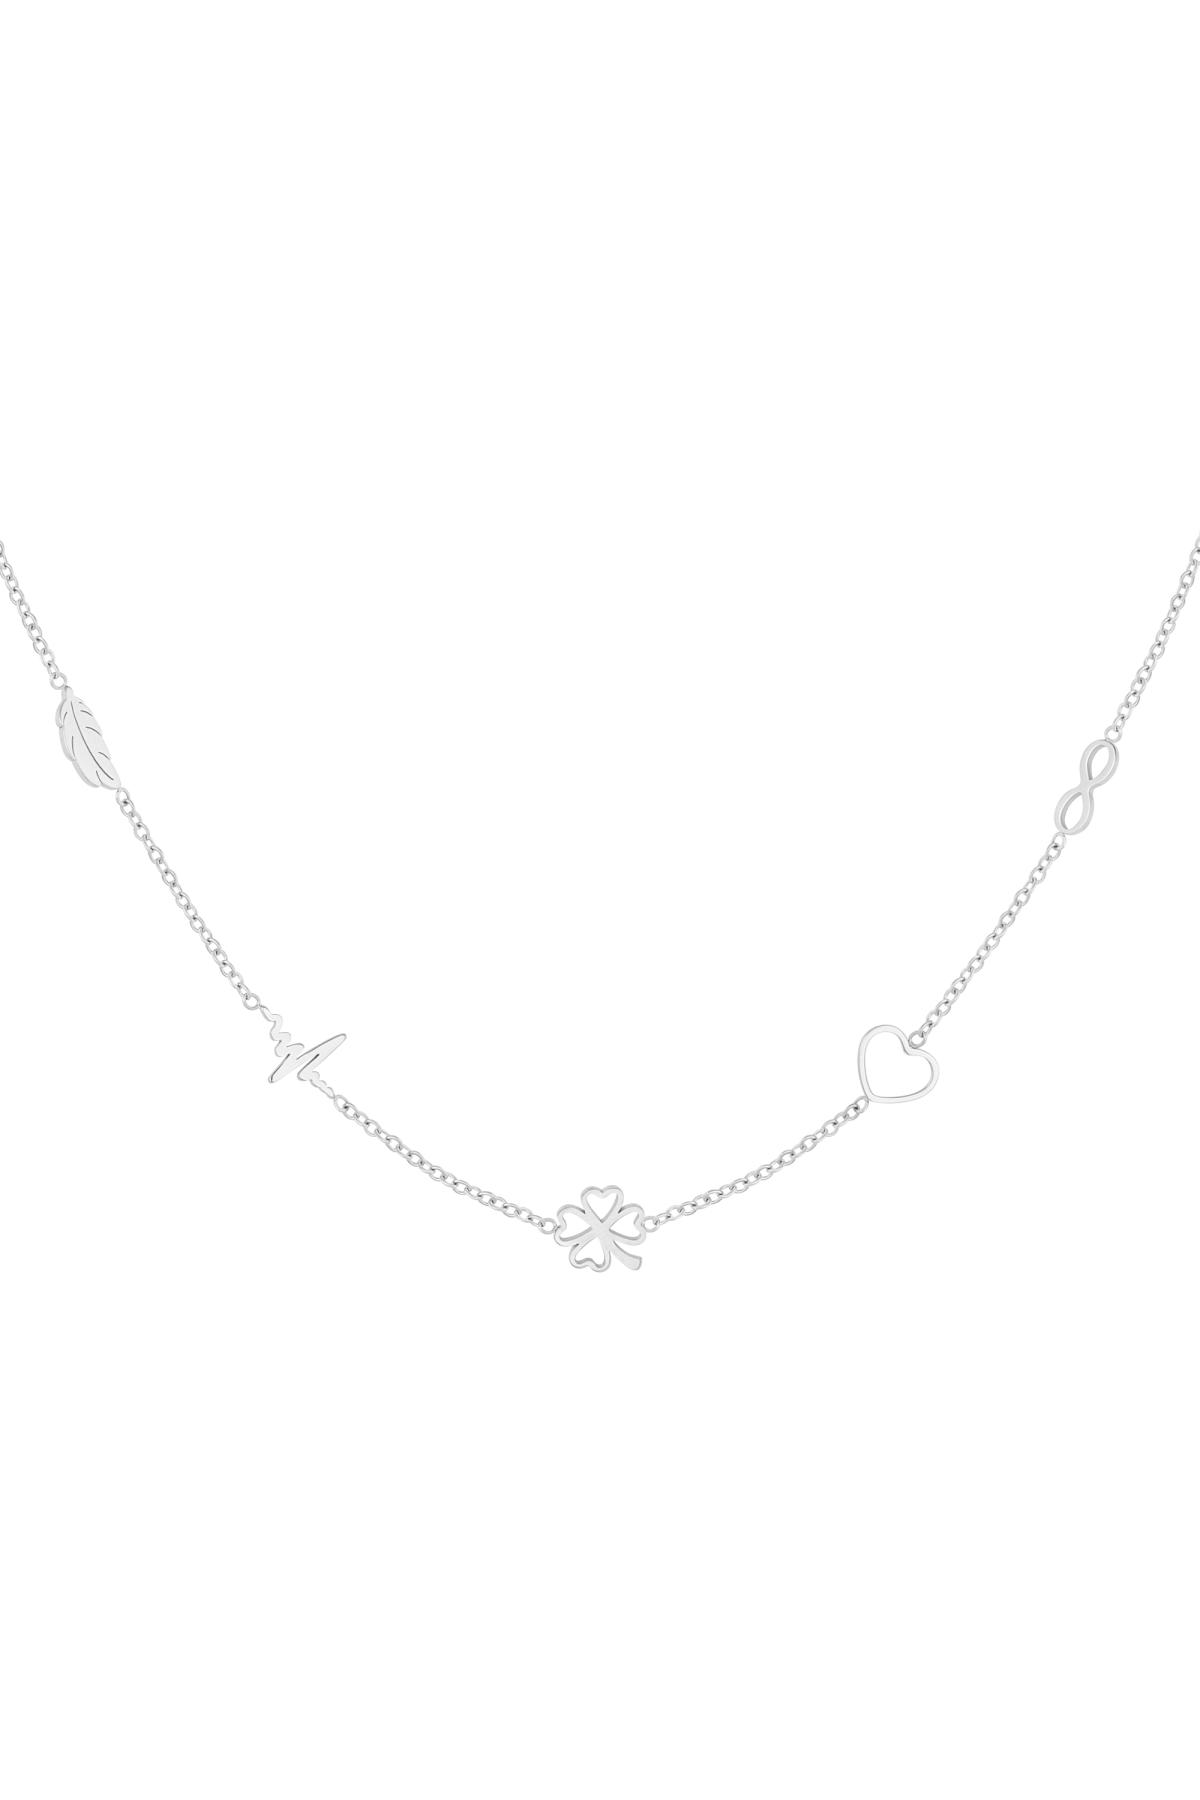 Minimalist necklace with charms Silver Stainless Steel